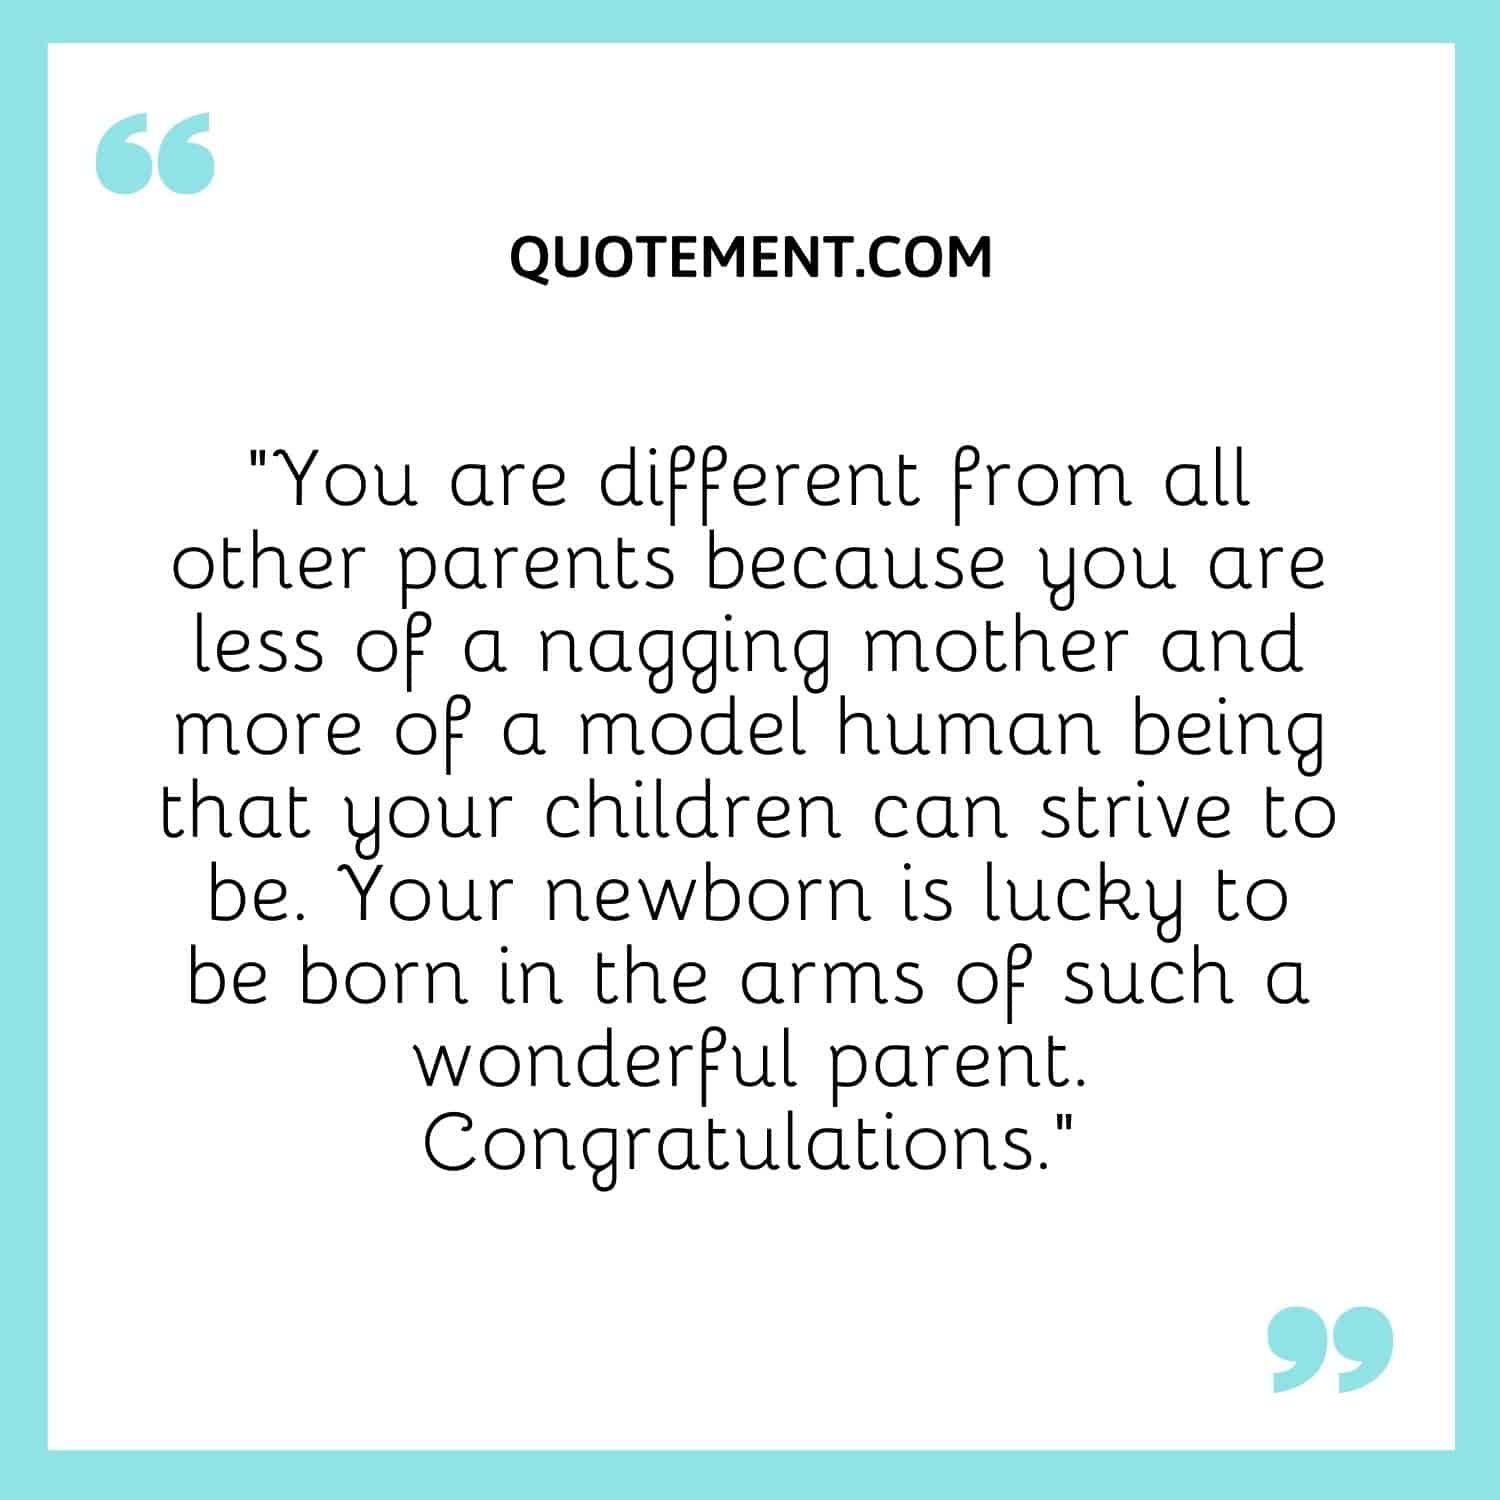 You are different from all other parents because you are less of a nagging mother and more of a model human being that your children can strive to be.